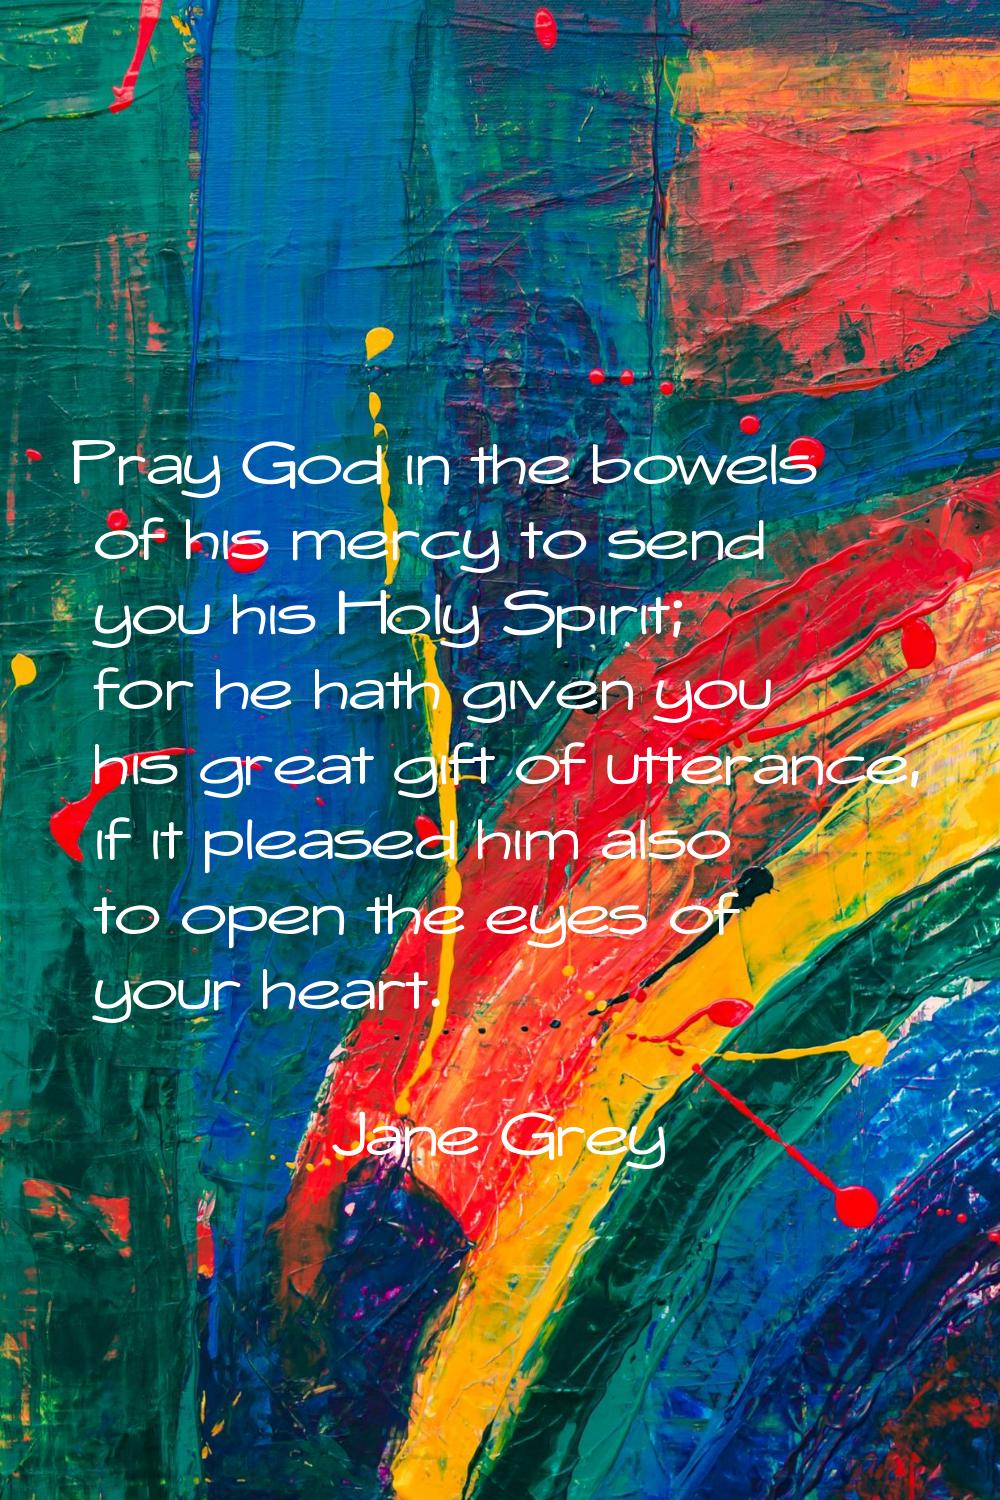 Pray God in the bowels of his mercy to send you his Holy Spirit; for he hath given you his great gi